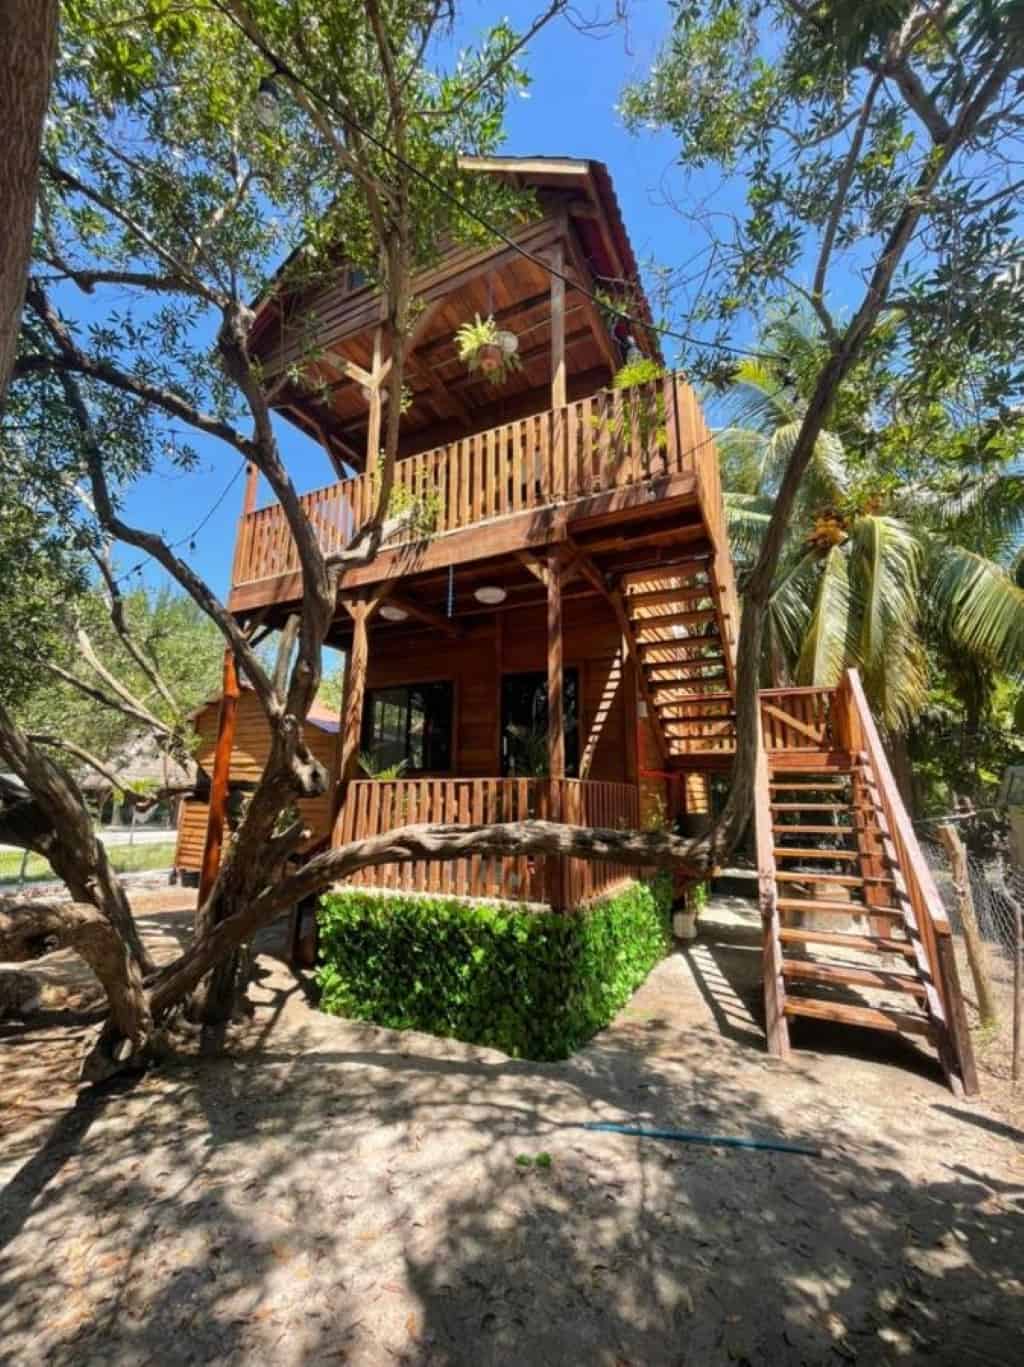 New Cabañas El Refugio Holbox By The Spot Rentals - a unique, rustic and cool accommodation within walking distance of the Caribbean Sea